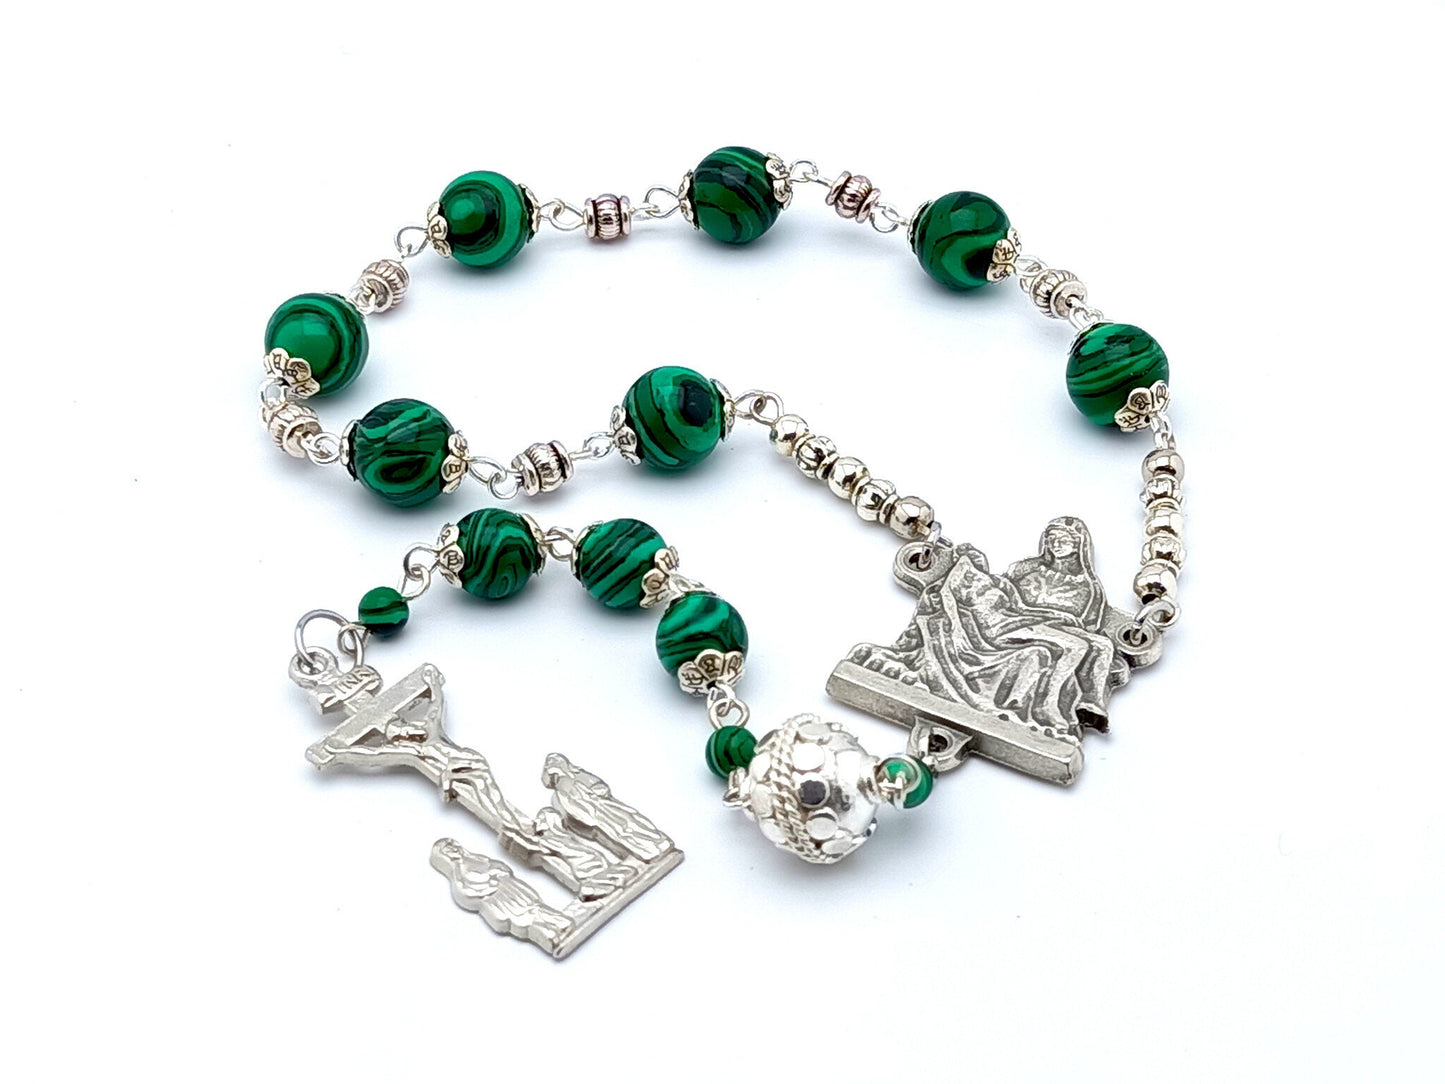 Our Lady of Sorrows unique rosary beads servite rosary with malachite gemstone beads, silver crucifix and La Pieta centre medal.